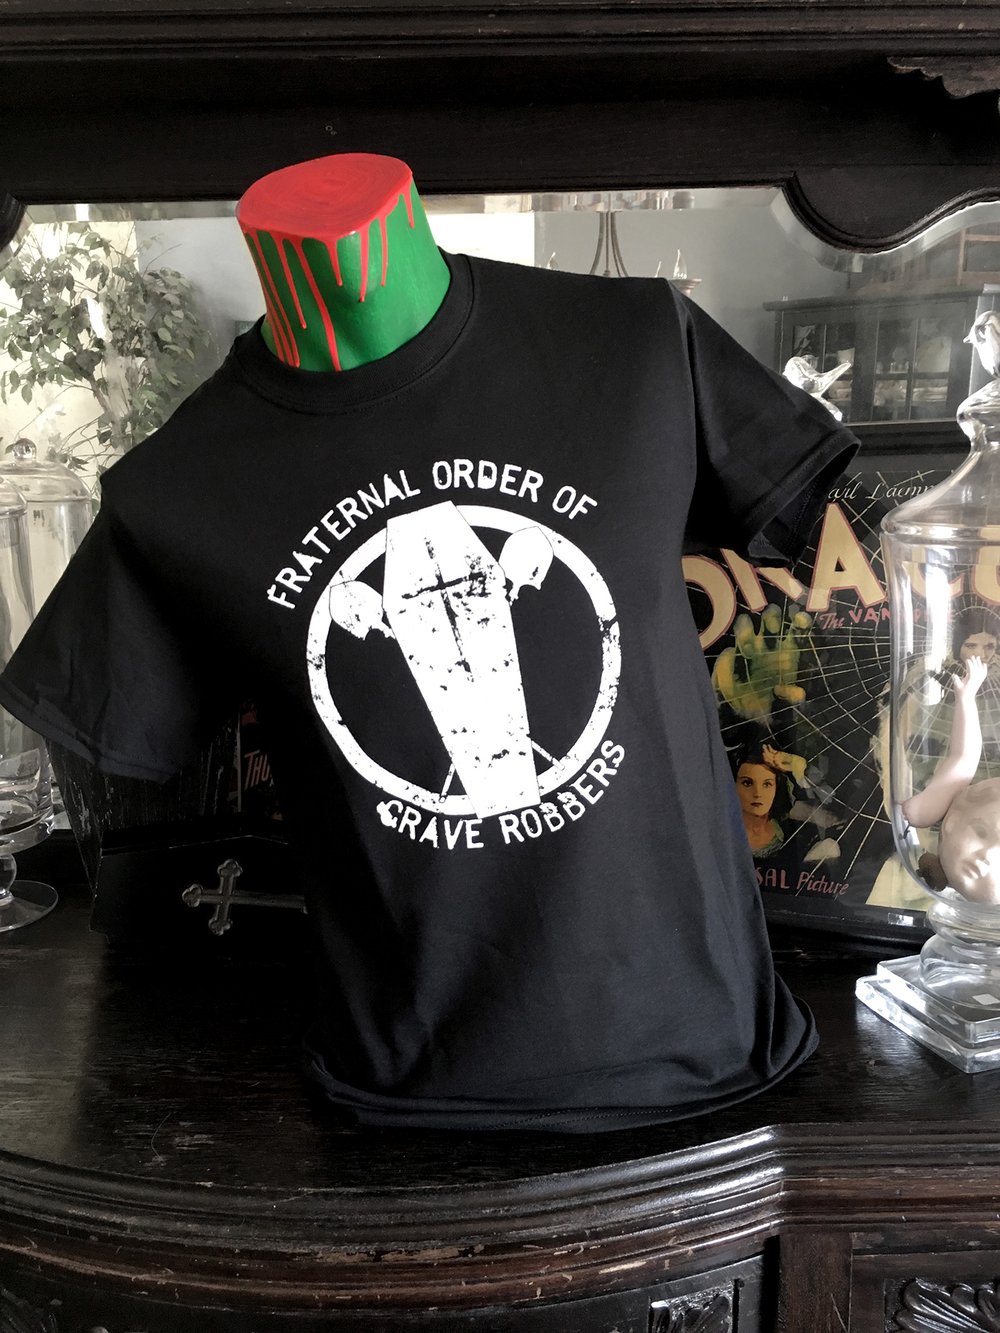 "Fraternal Order Of Grave Robbers" T-Shirt